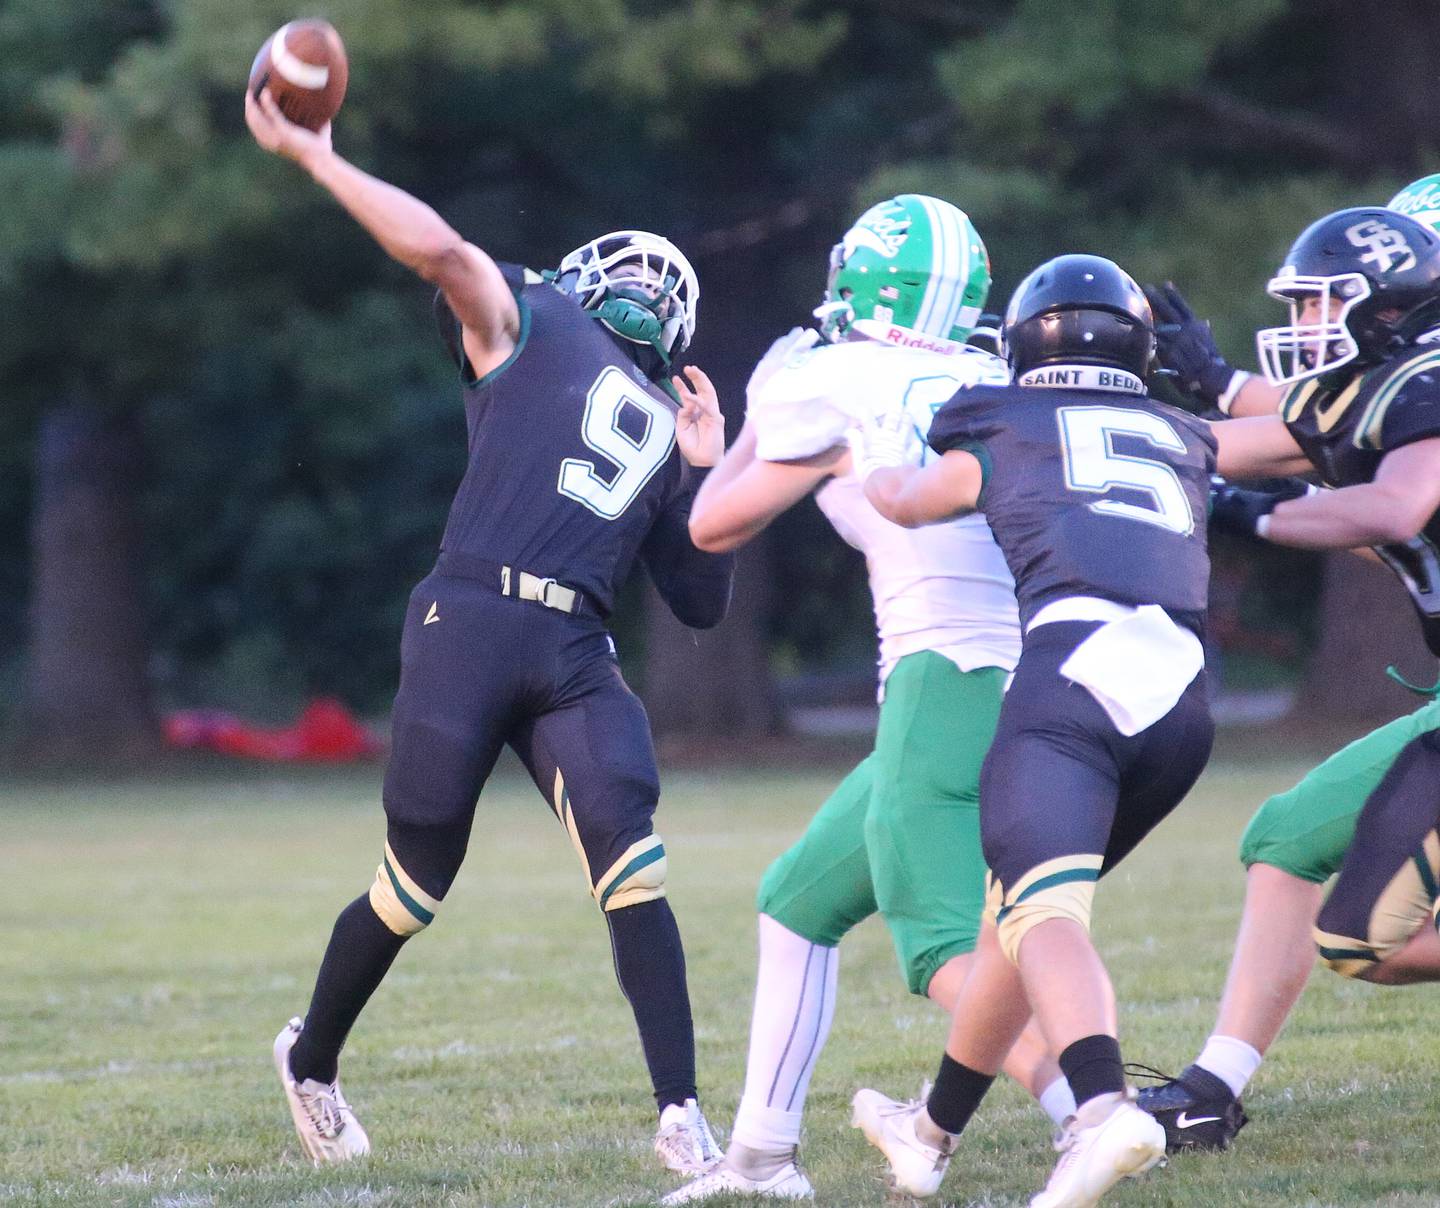 St. Bede quarterback Max Bray throws a long pass down the field against Ridgewood on Friday, Sept. 15, 2023 at St. Bede Academy.